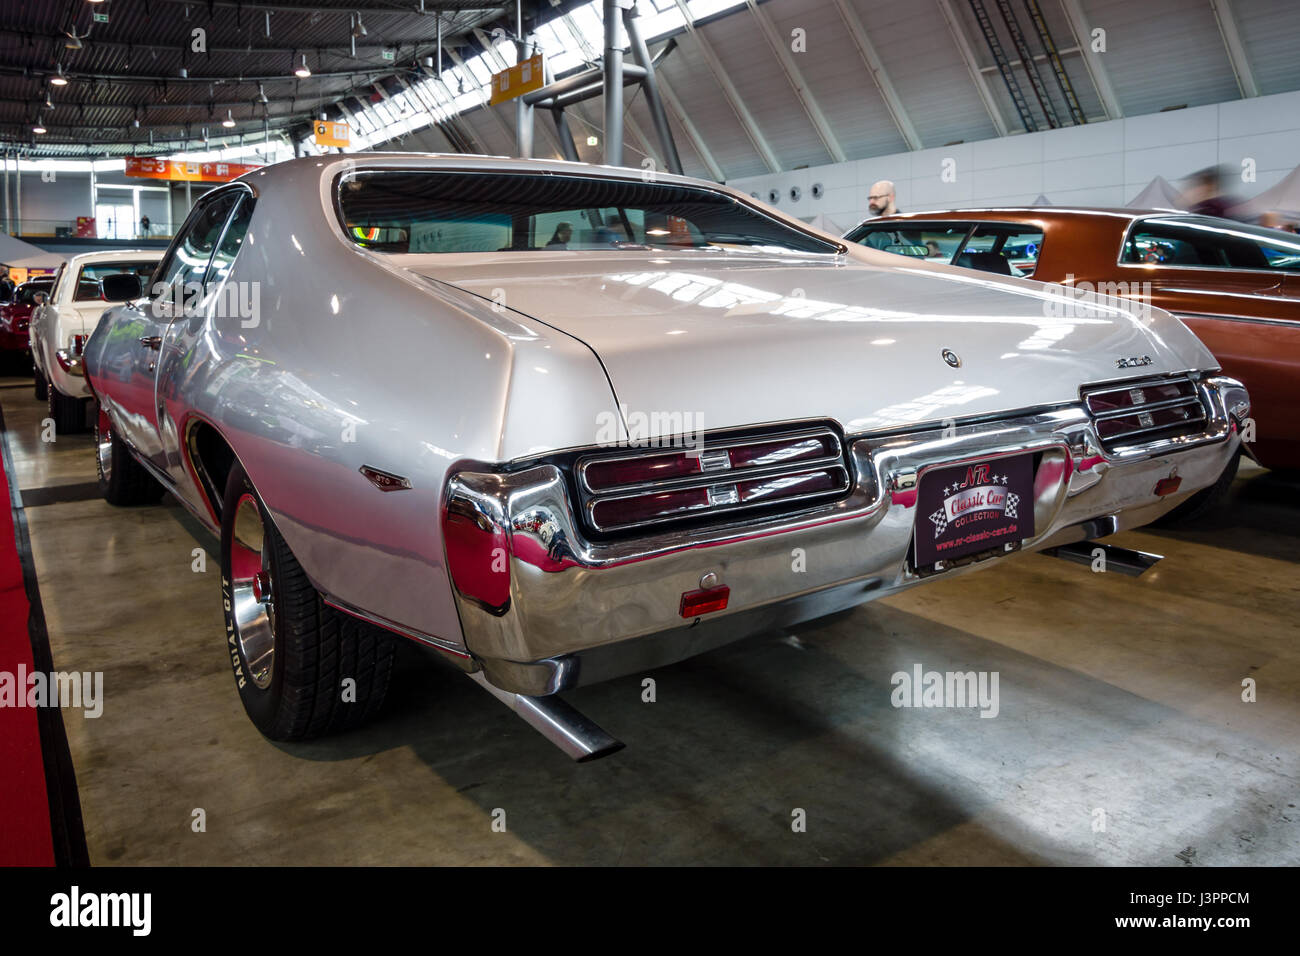 STUTTGART, GERMANY - MARCH 03, 2017: Muscle car Pontiac GTO, 1969. Rear view. Europe's greatest classic car exhibition 'RETRO CLASSICS' Stock Photo